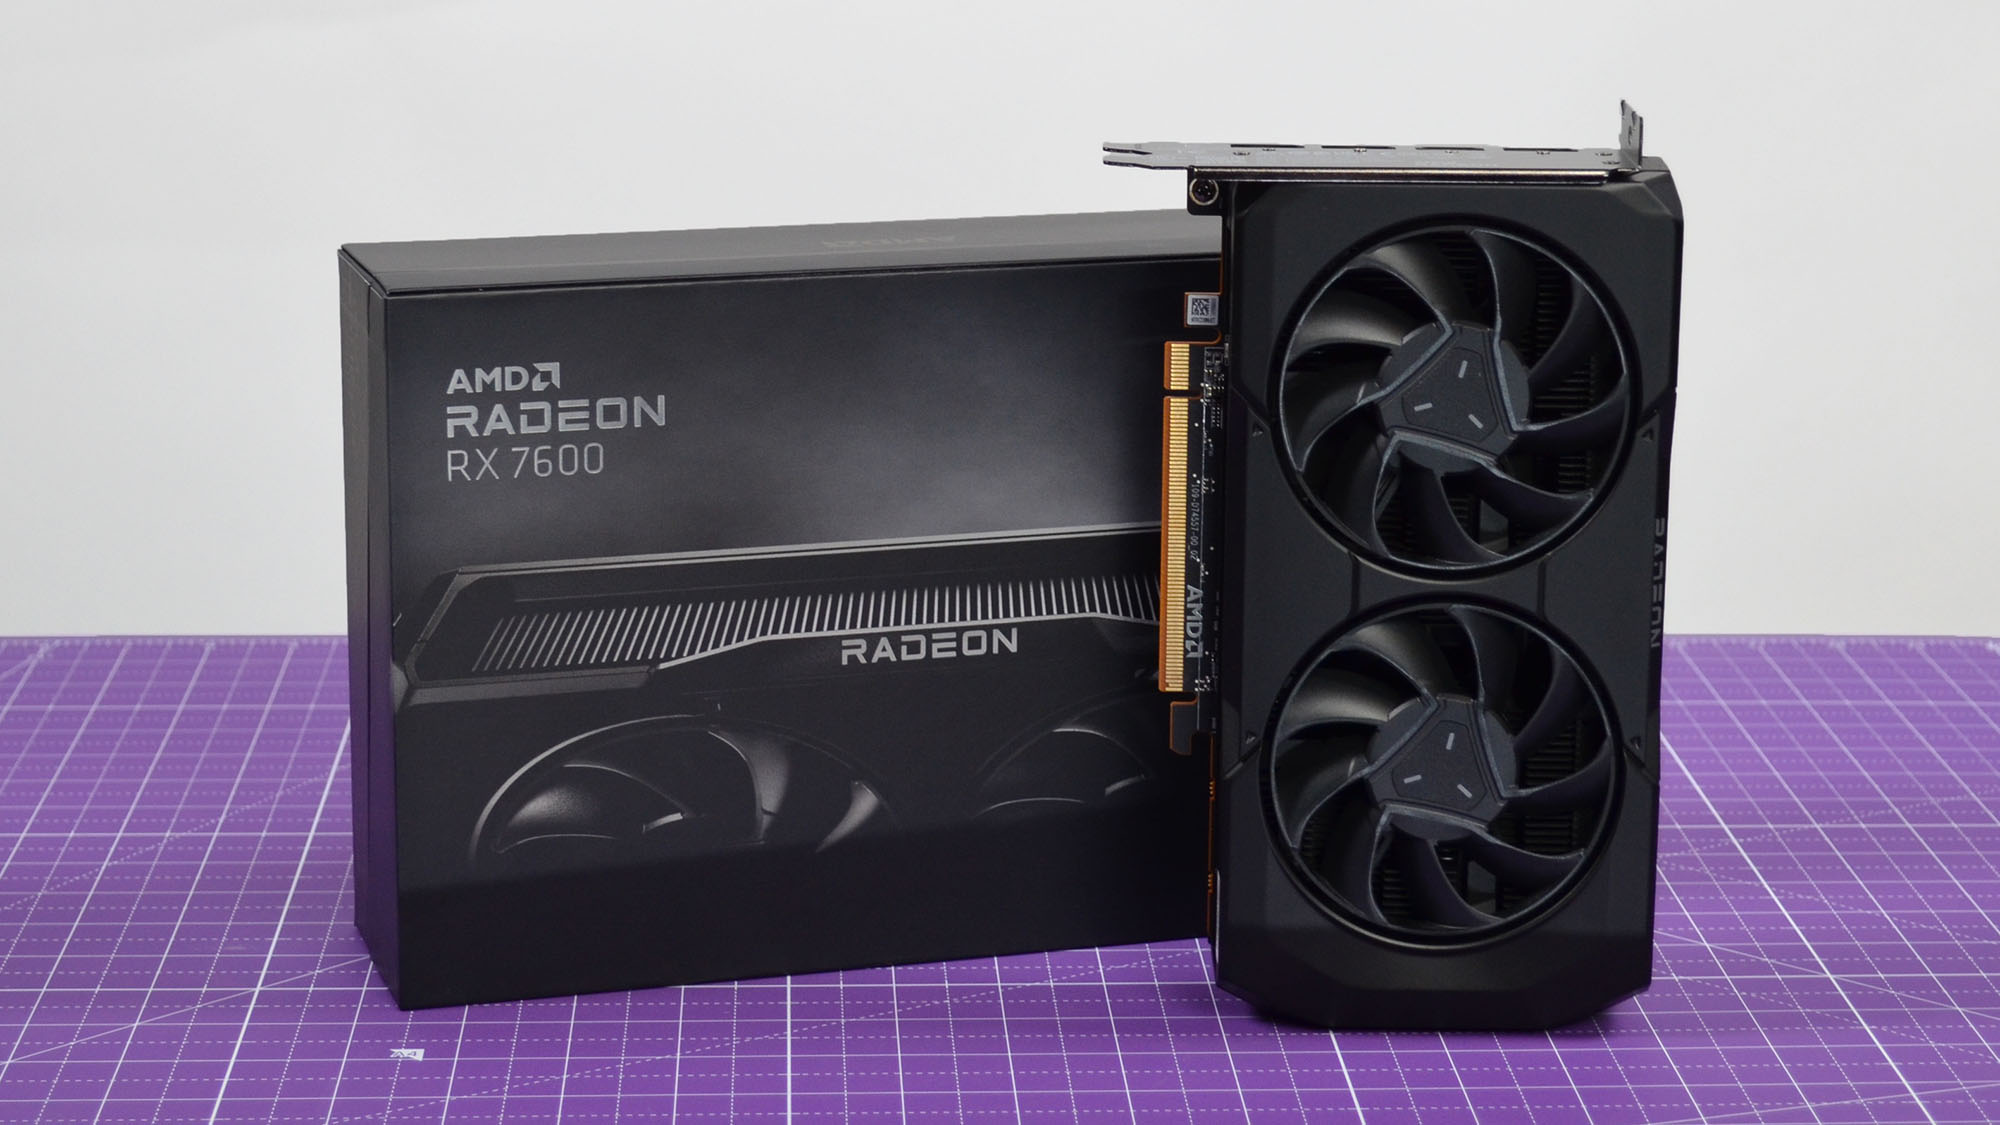 AMD Radeon RX 7600: a major gift for gamers on a budget